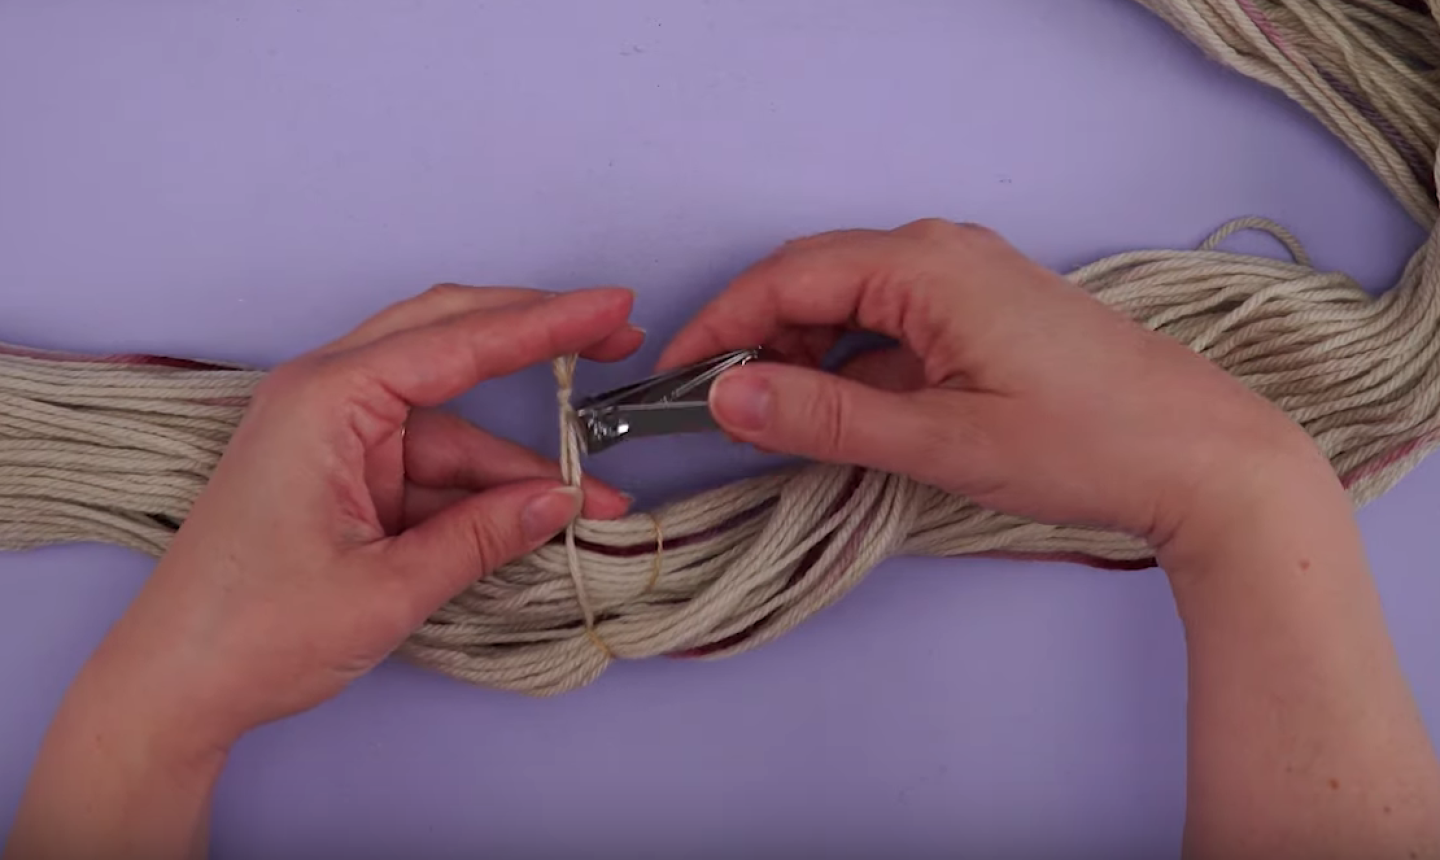 cutting yarn with nail clippers